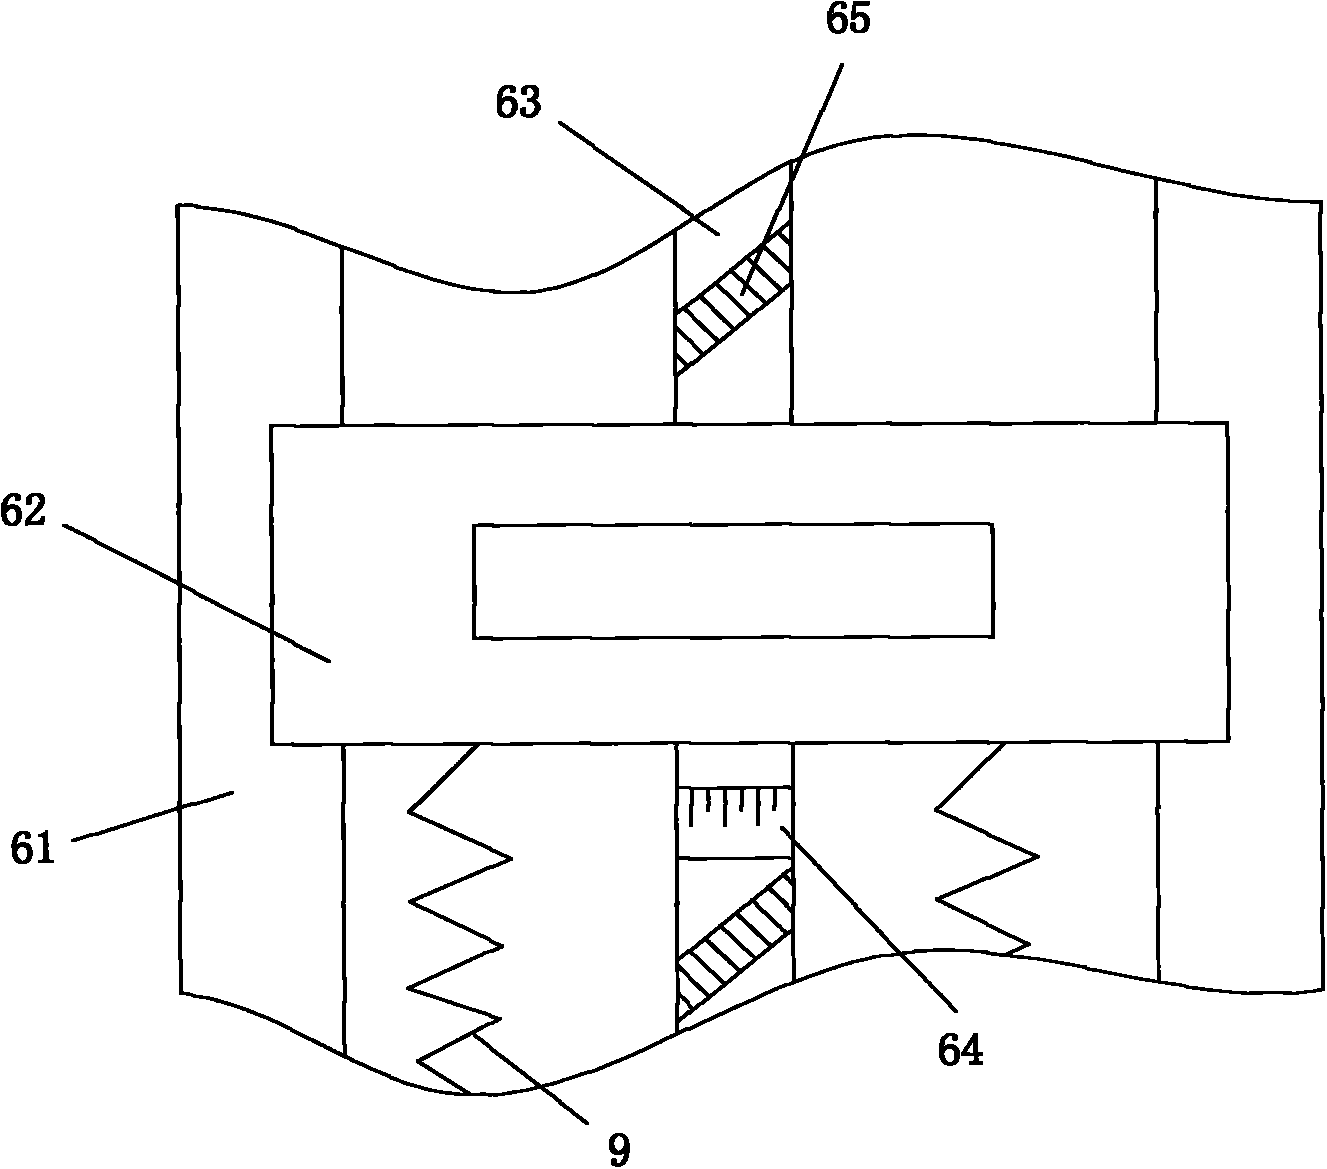 Draught fan failure detection apparatus and method